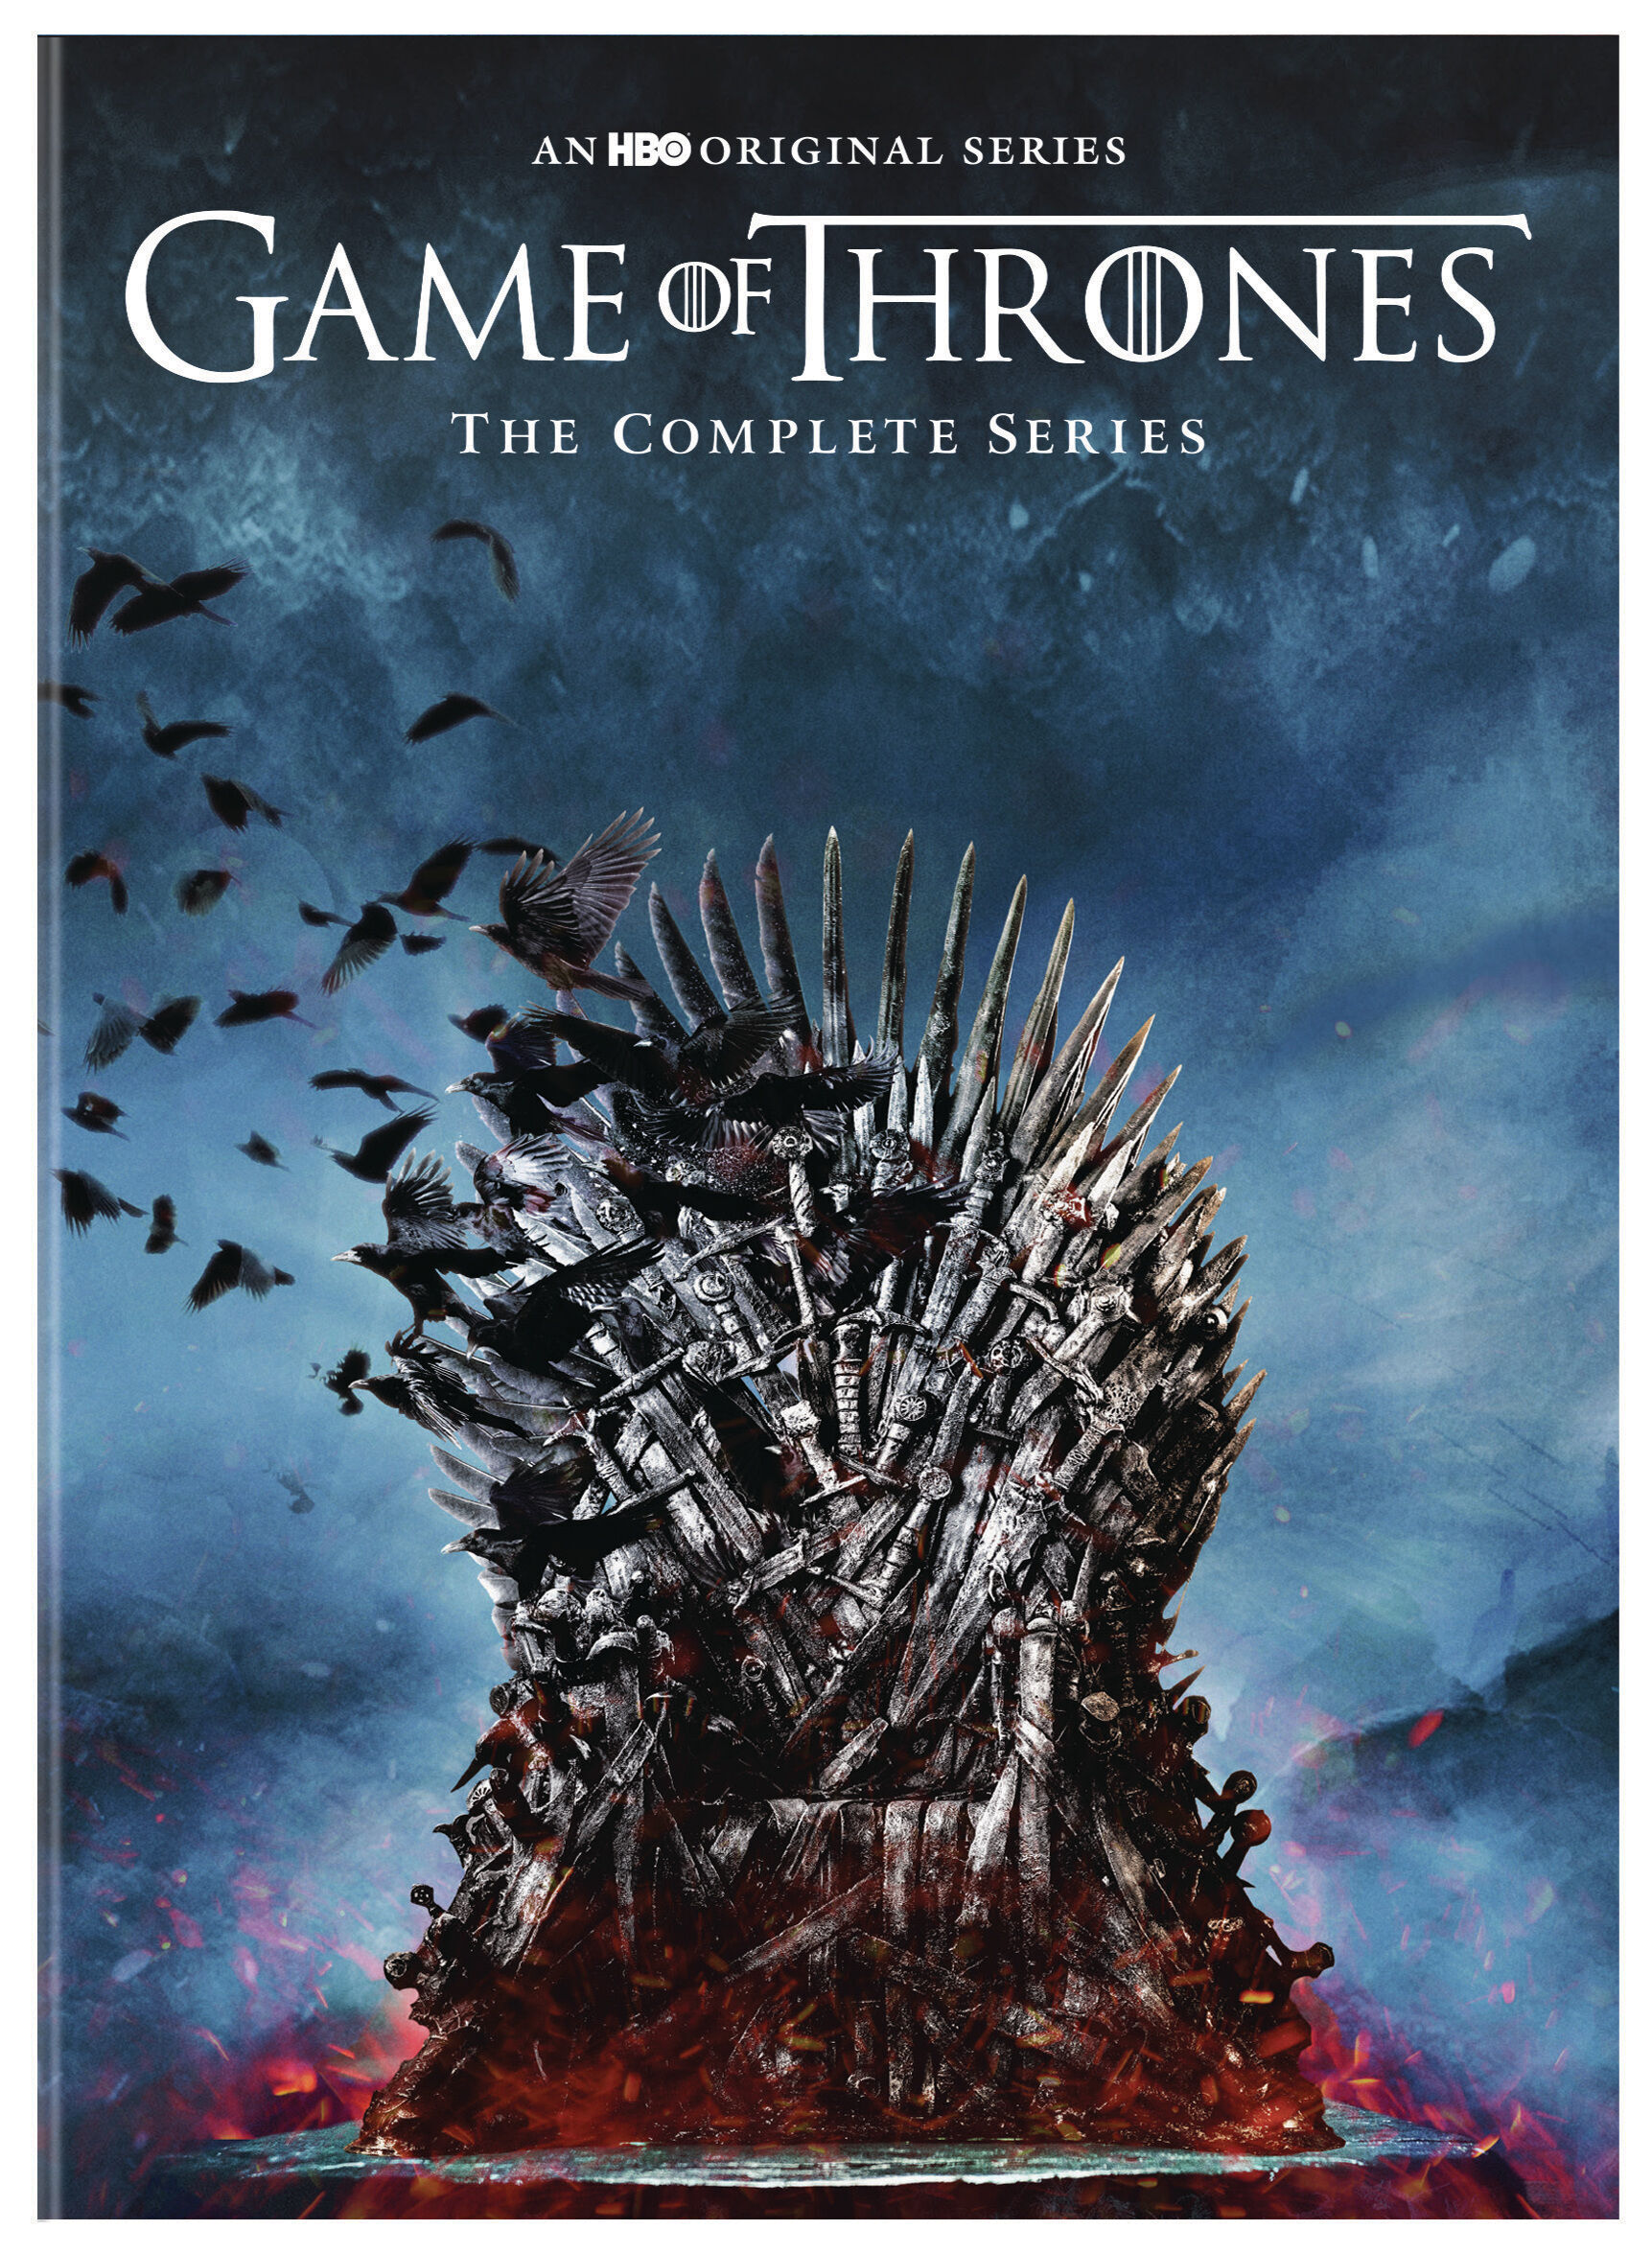 Game Of Thrones: The Complete Series (Box Set) - DVD [ 2019 ]  - Sci Fi Television On DVD - TV Shows On GRUV